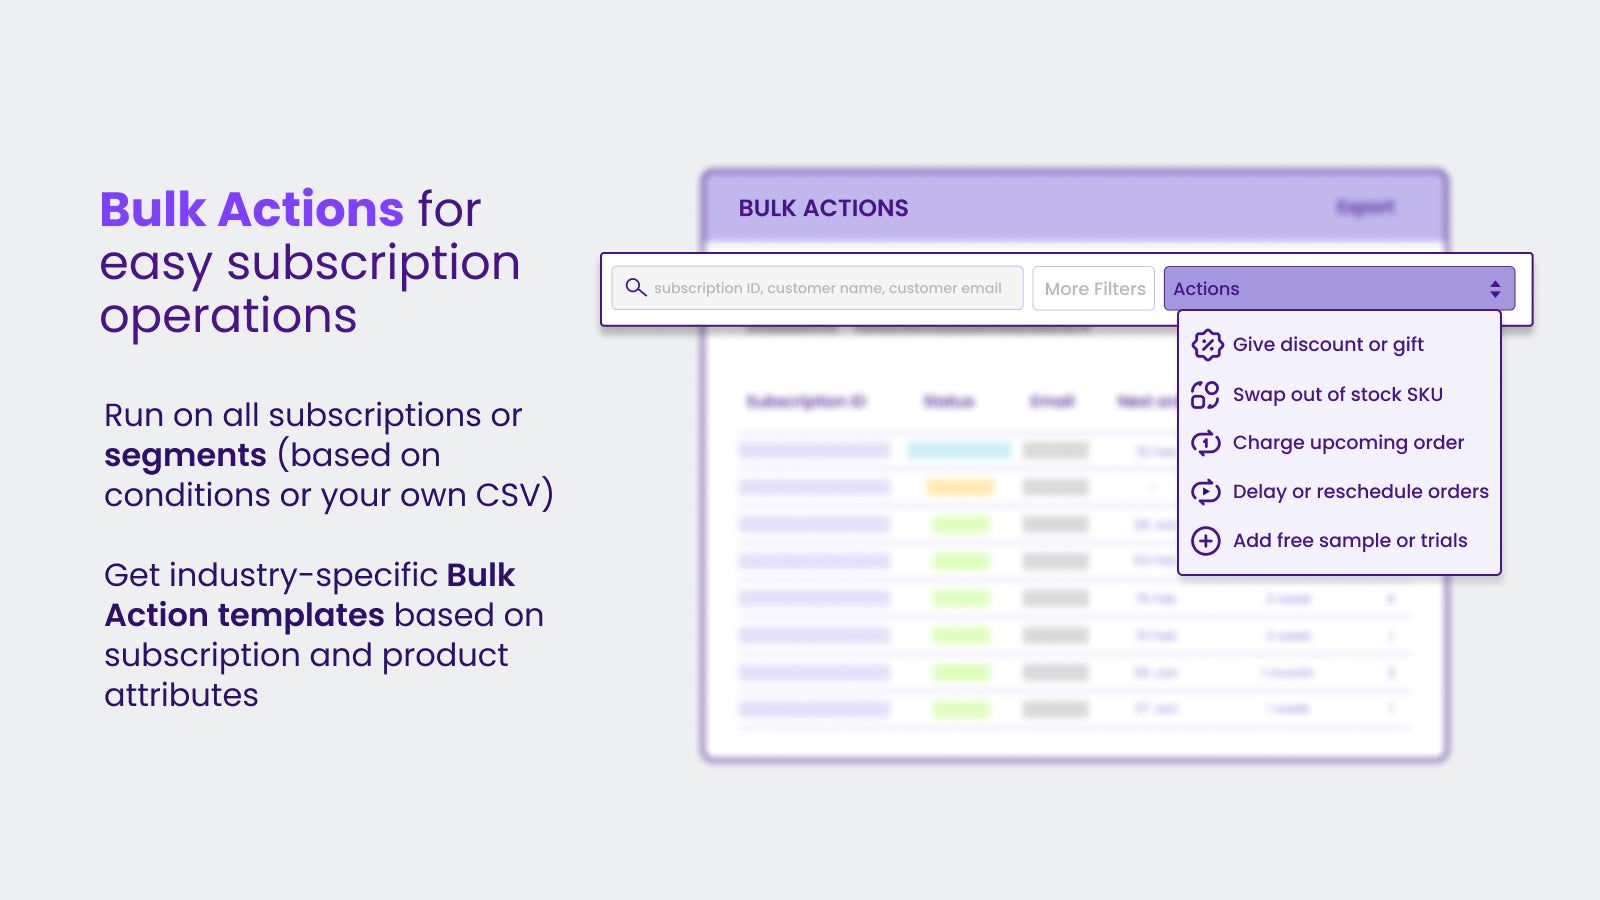 Bulk actions for large scale operations on subscriber base